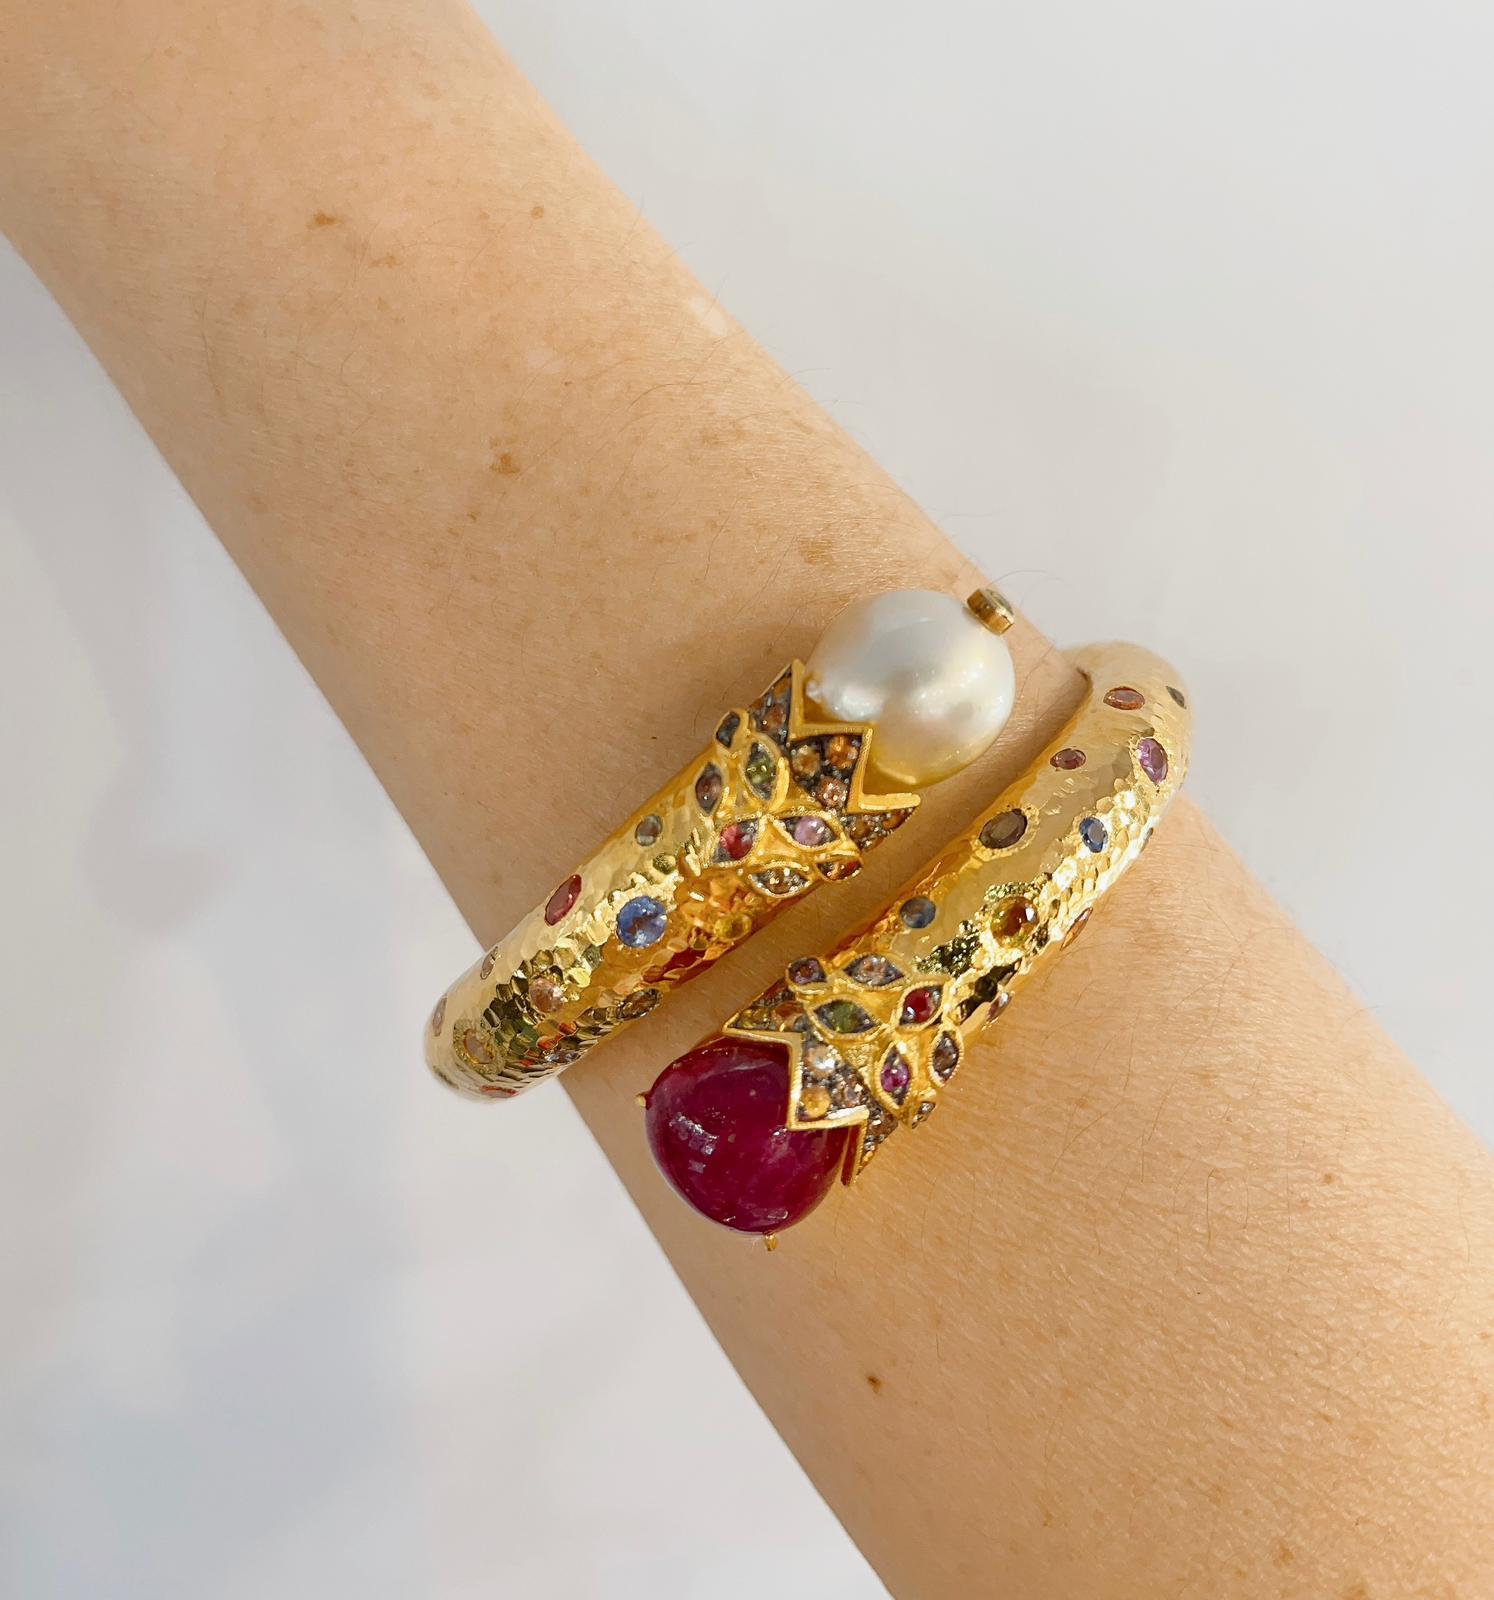 Cabochon Bochic “Orient” Ruby, Fancy Sapphire and South Sea Bangle Set in 22k Gold